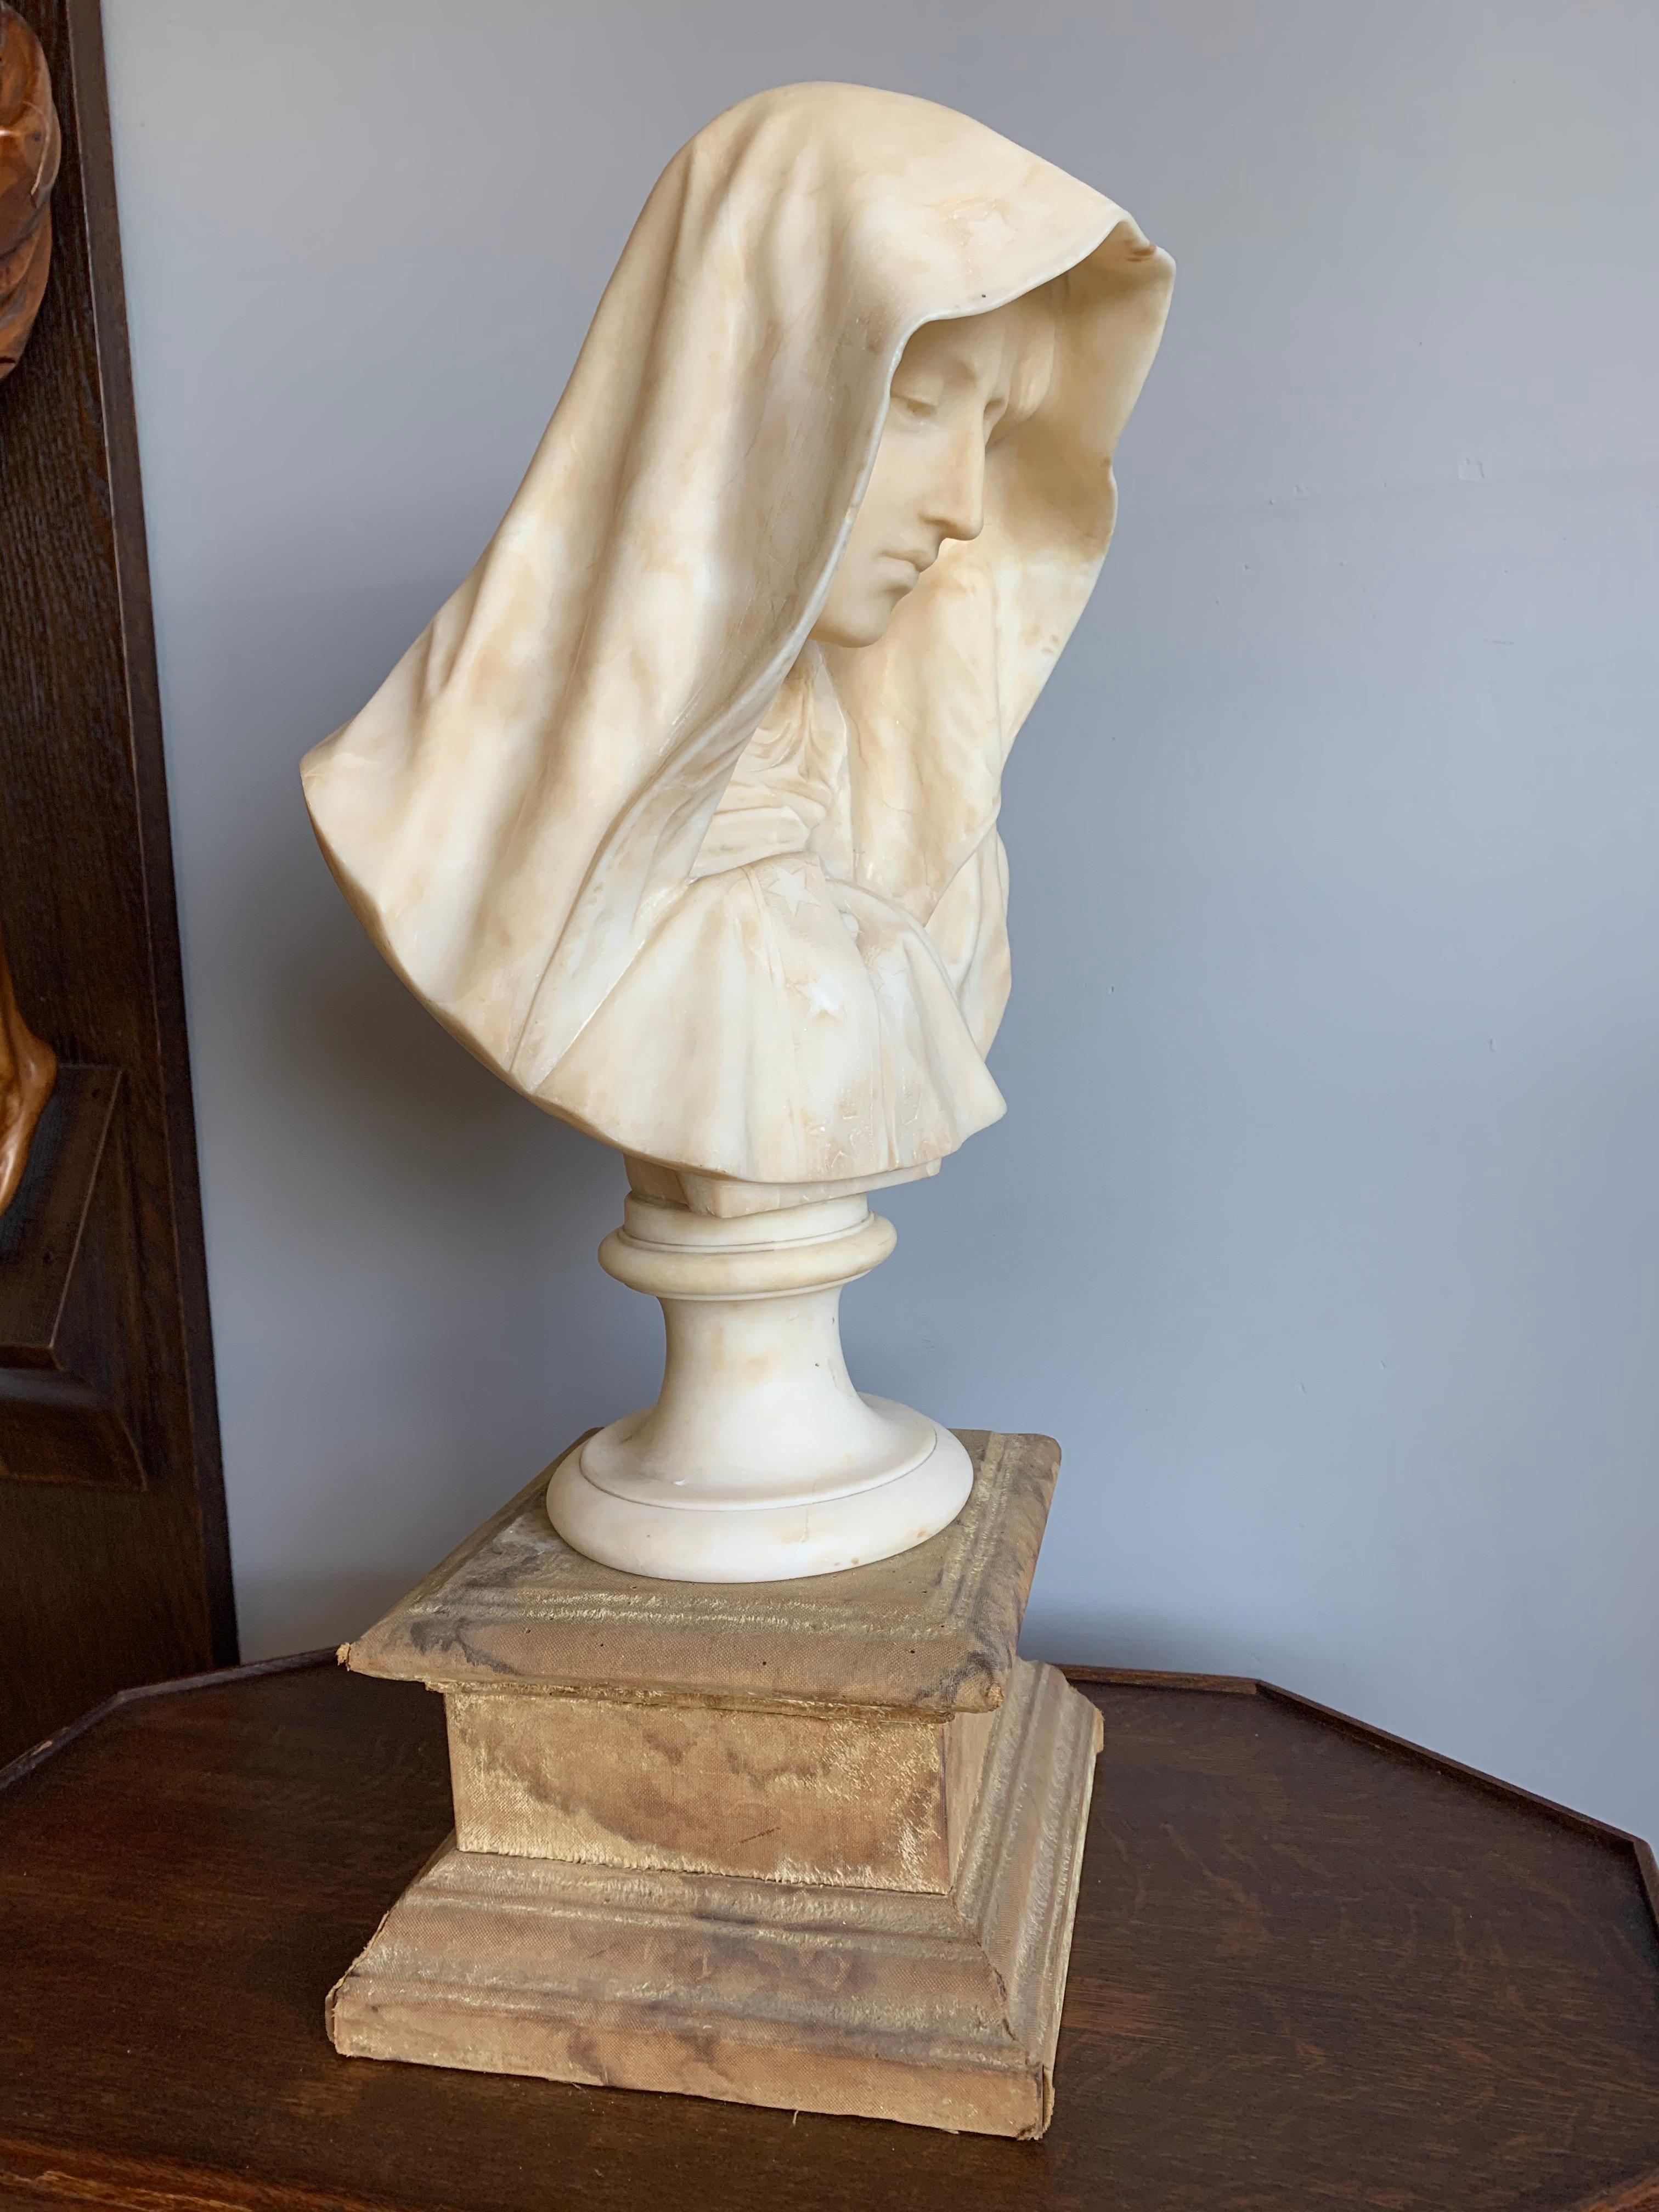 Hand-Crafted Rare and Hand Carved Early 1900 Alabaster Bust Sculpture of a Serene Virgin Mary